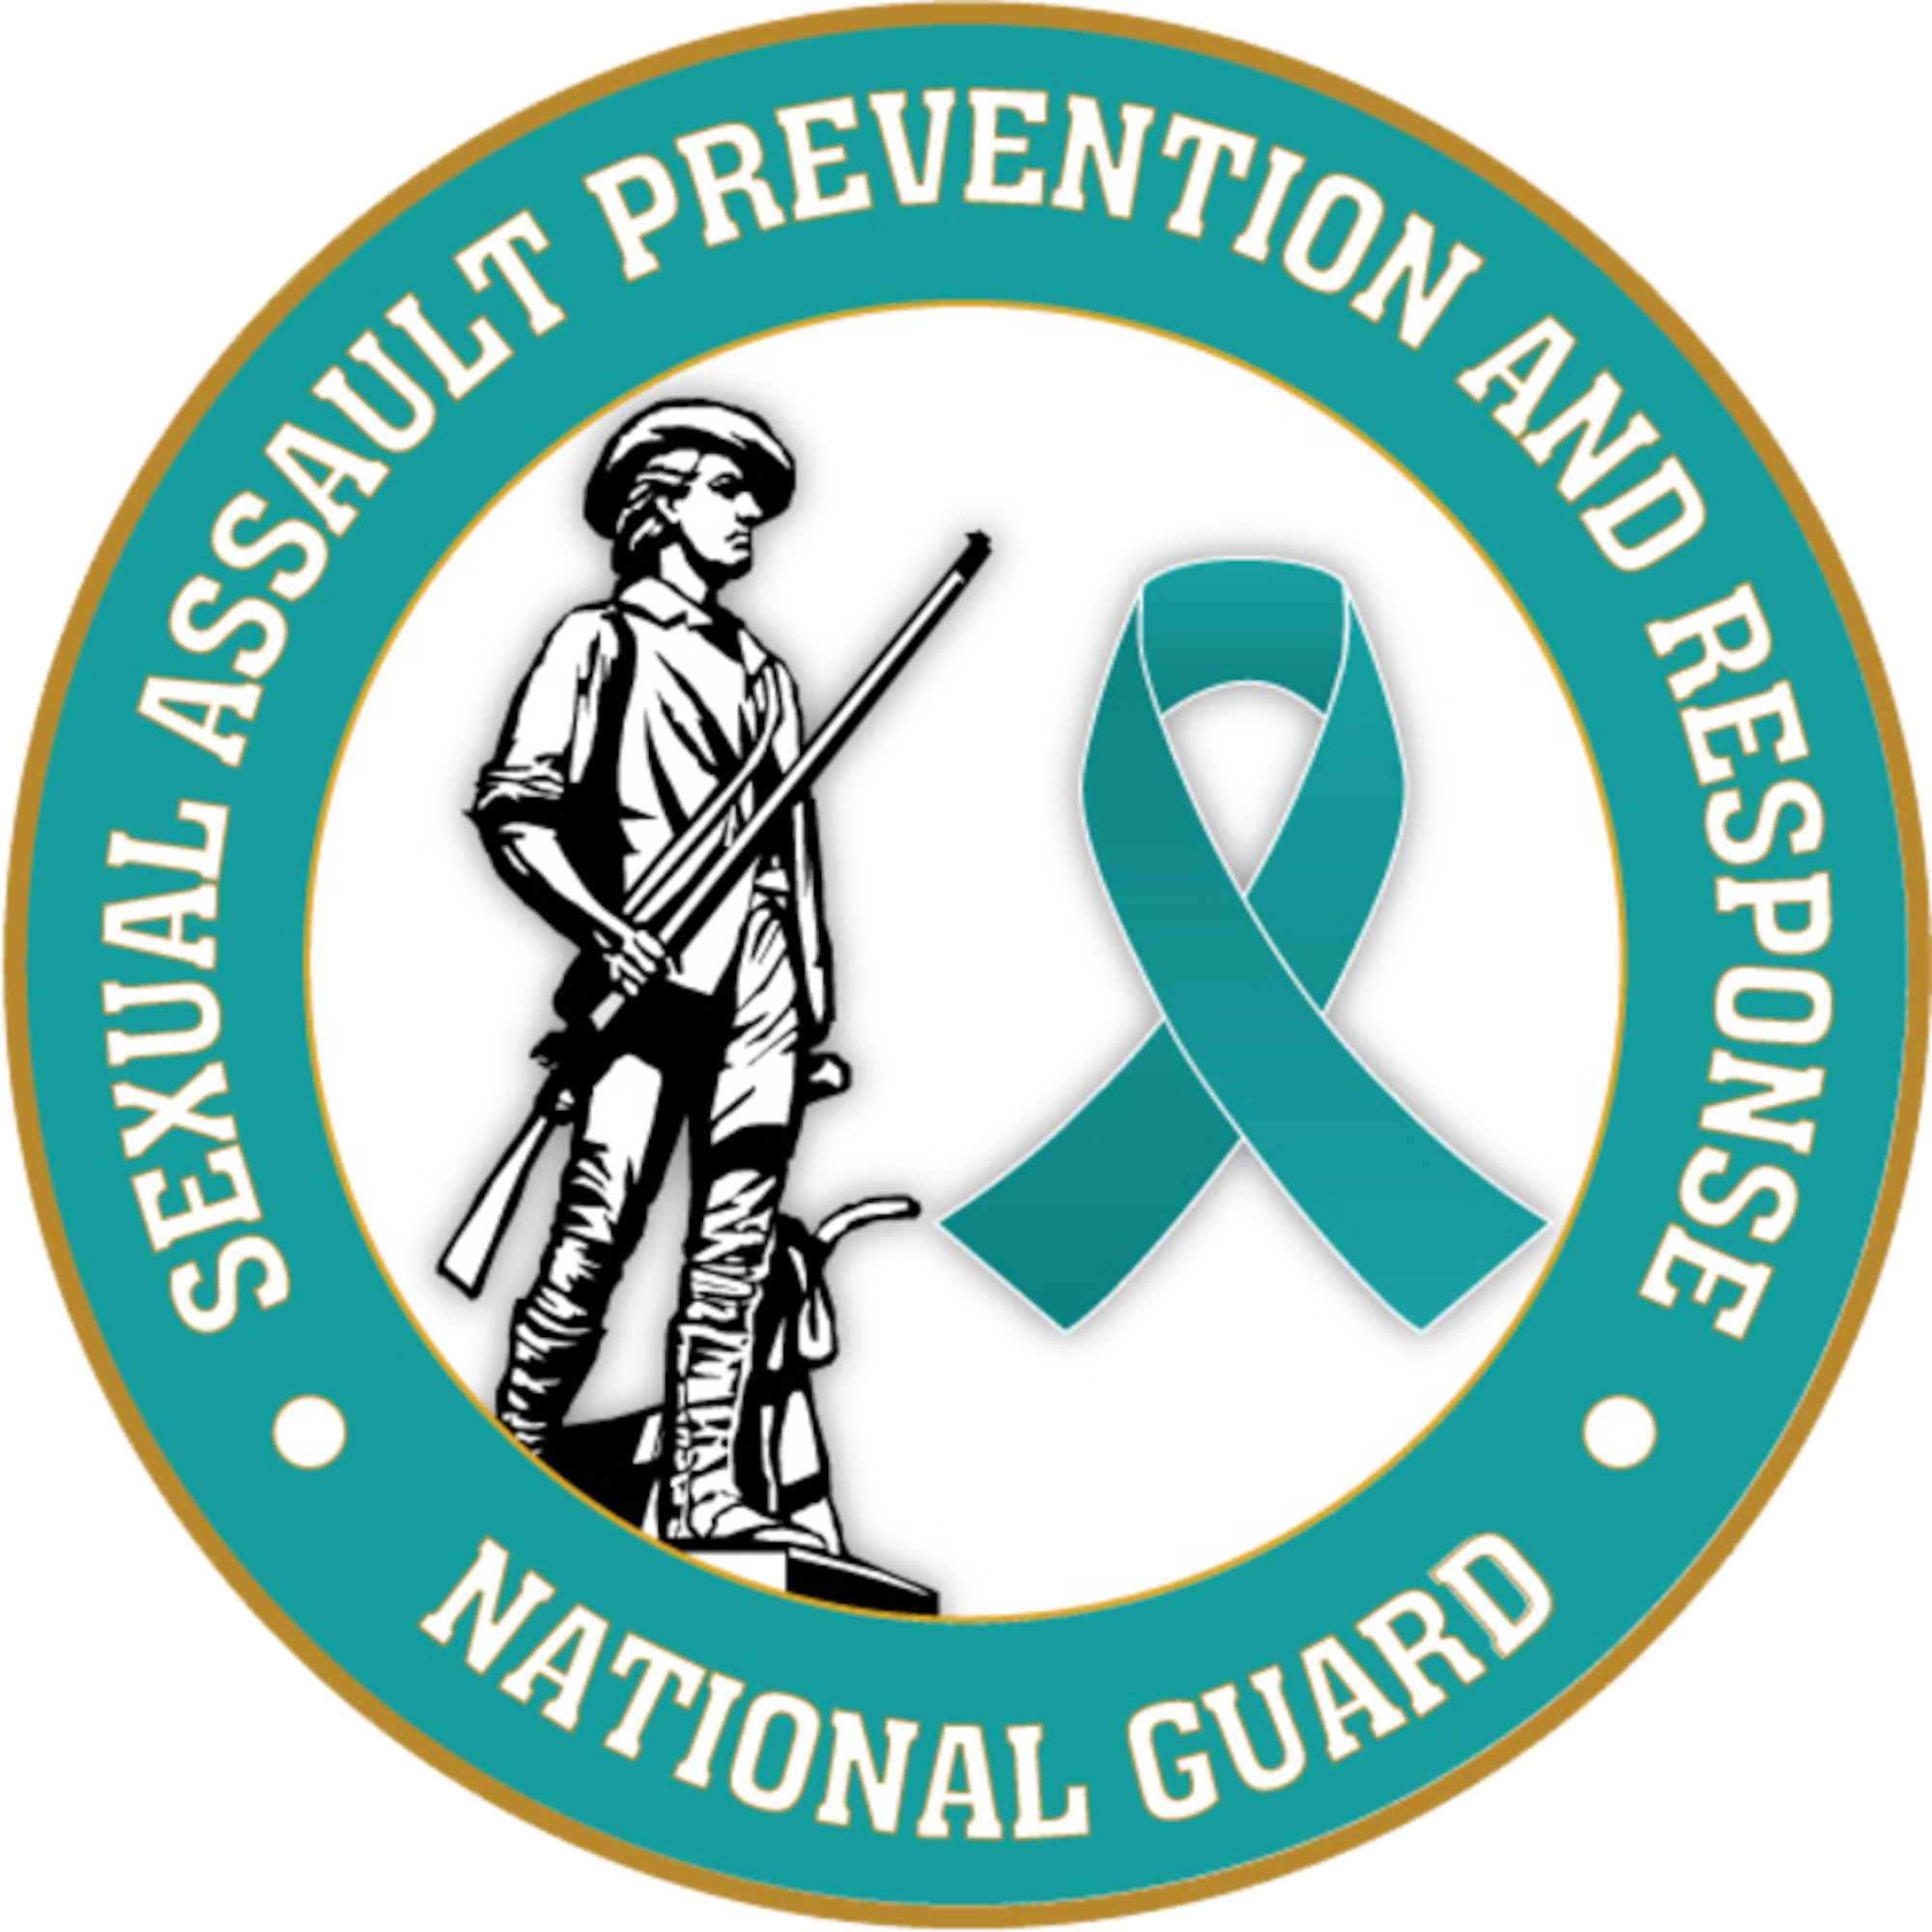 The National Guard Bureau is implementing changes to better fight sexual assault and harassment in the ranks with new prevention initiatives across the Guard force.